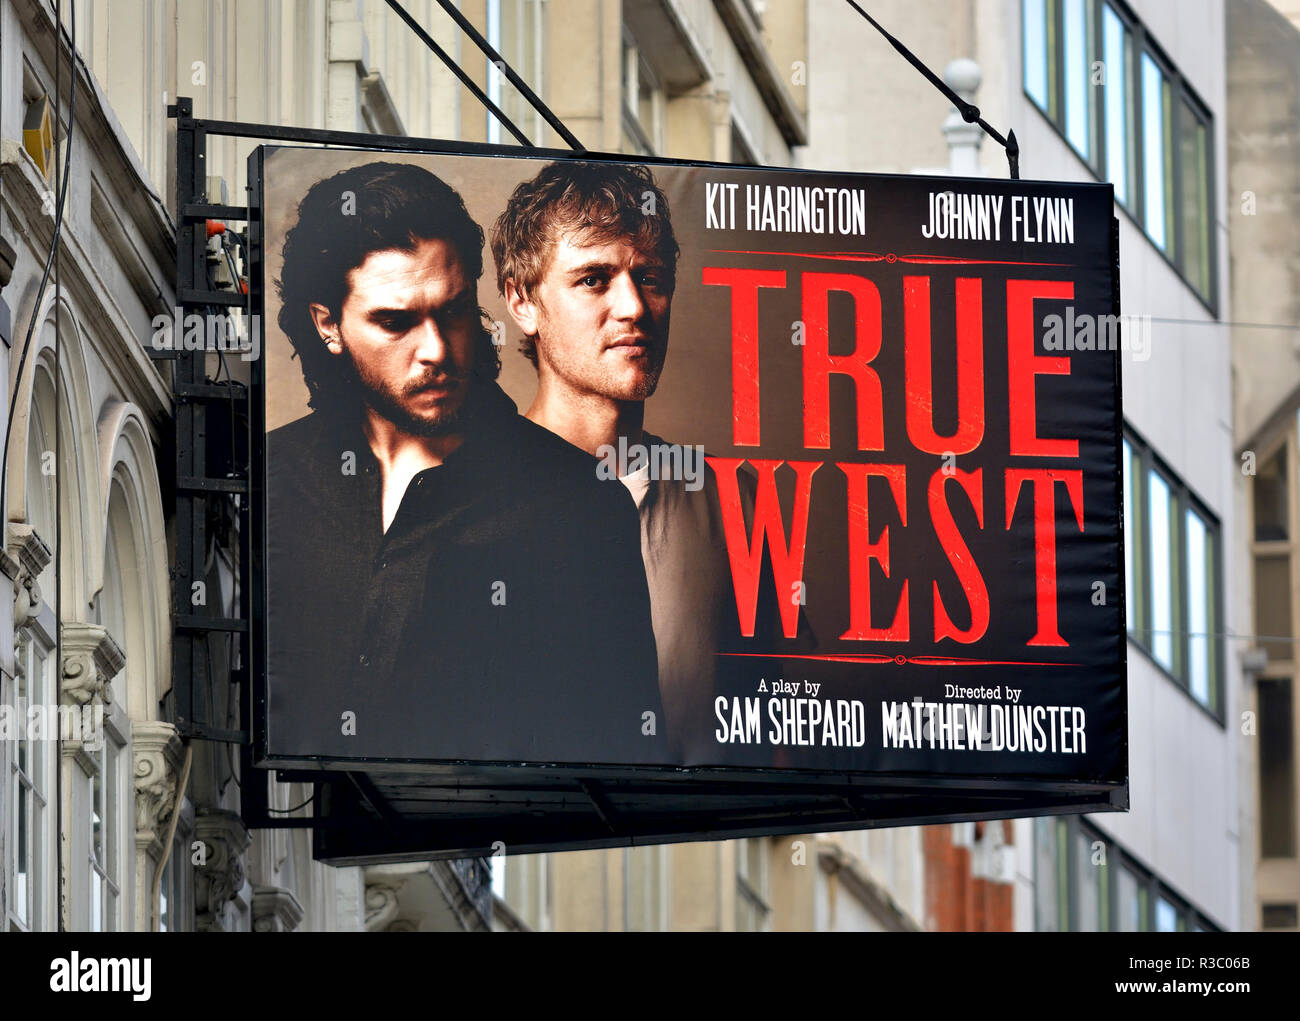 London, England, UK. 'True West' at the Vaudeville Theatre, the Strand. Play by Sam Shepard, starring Kit Harrington and Johnny Flynn, starting 23rd N Stock Photo